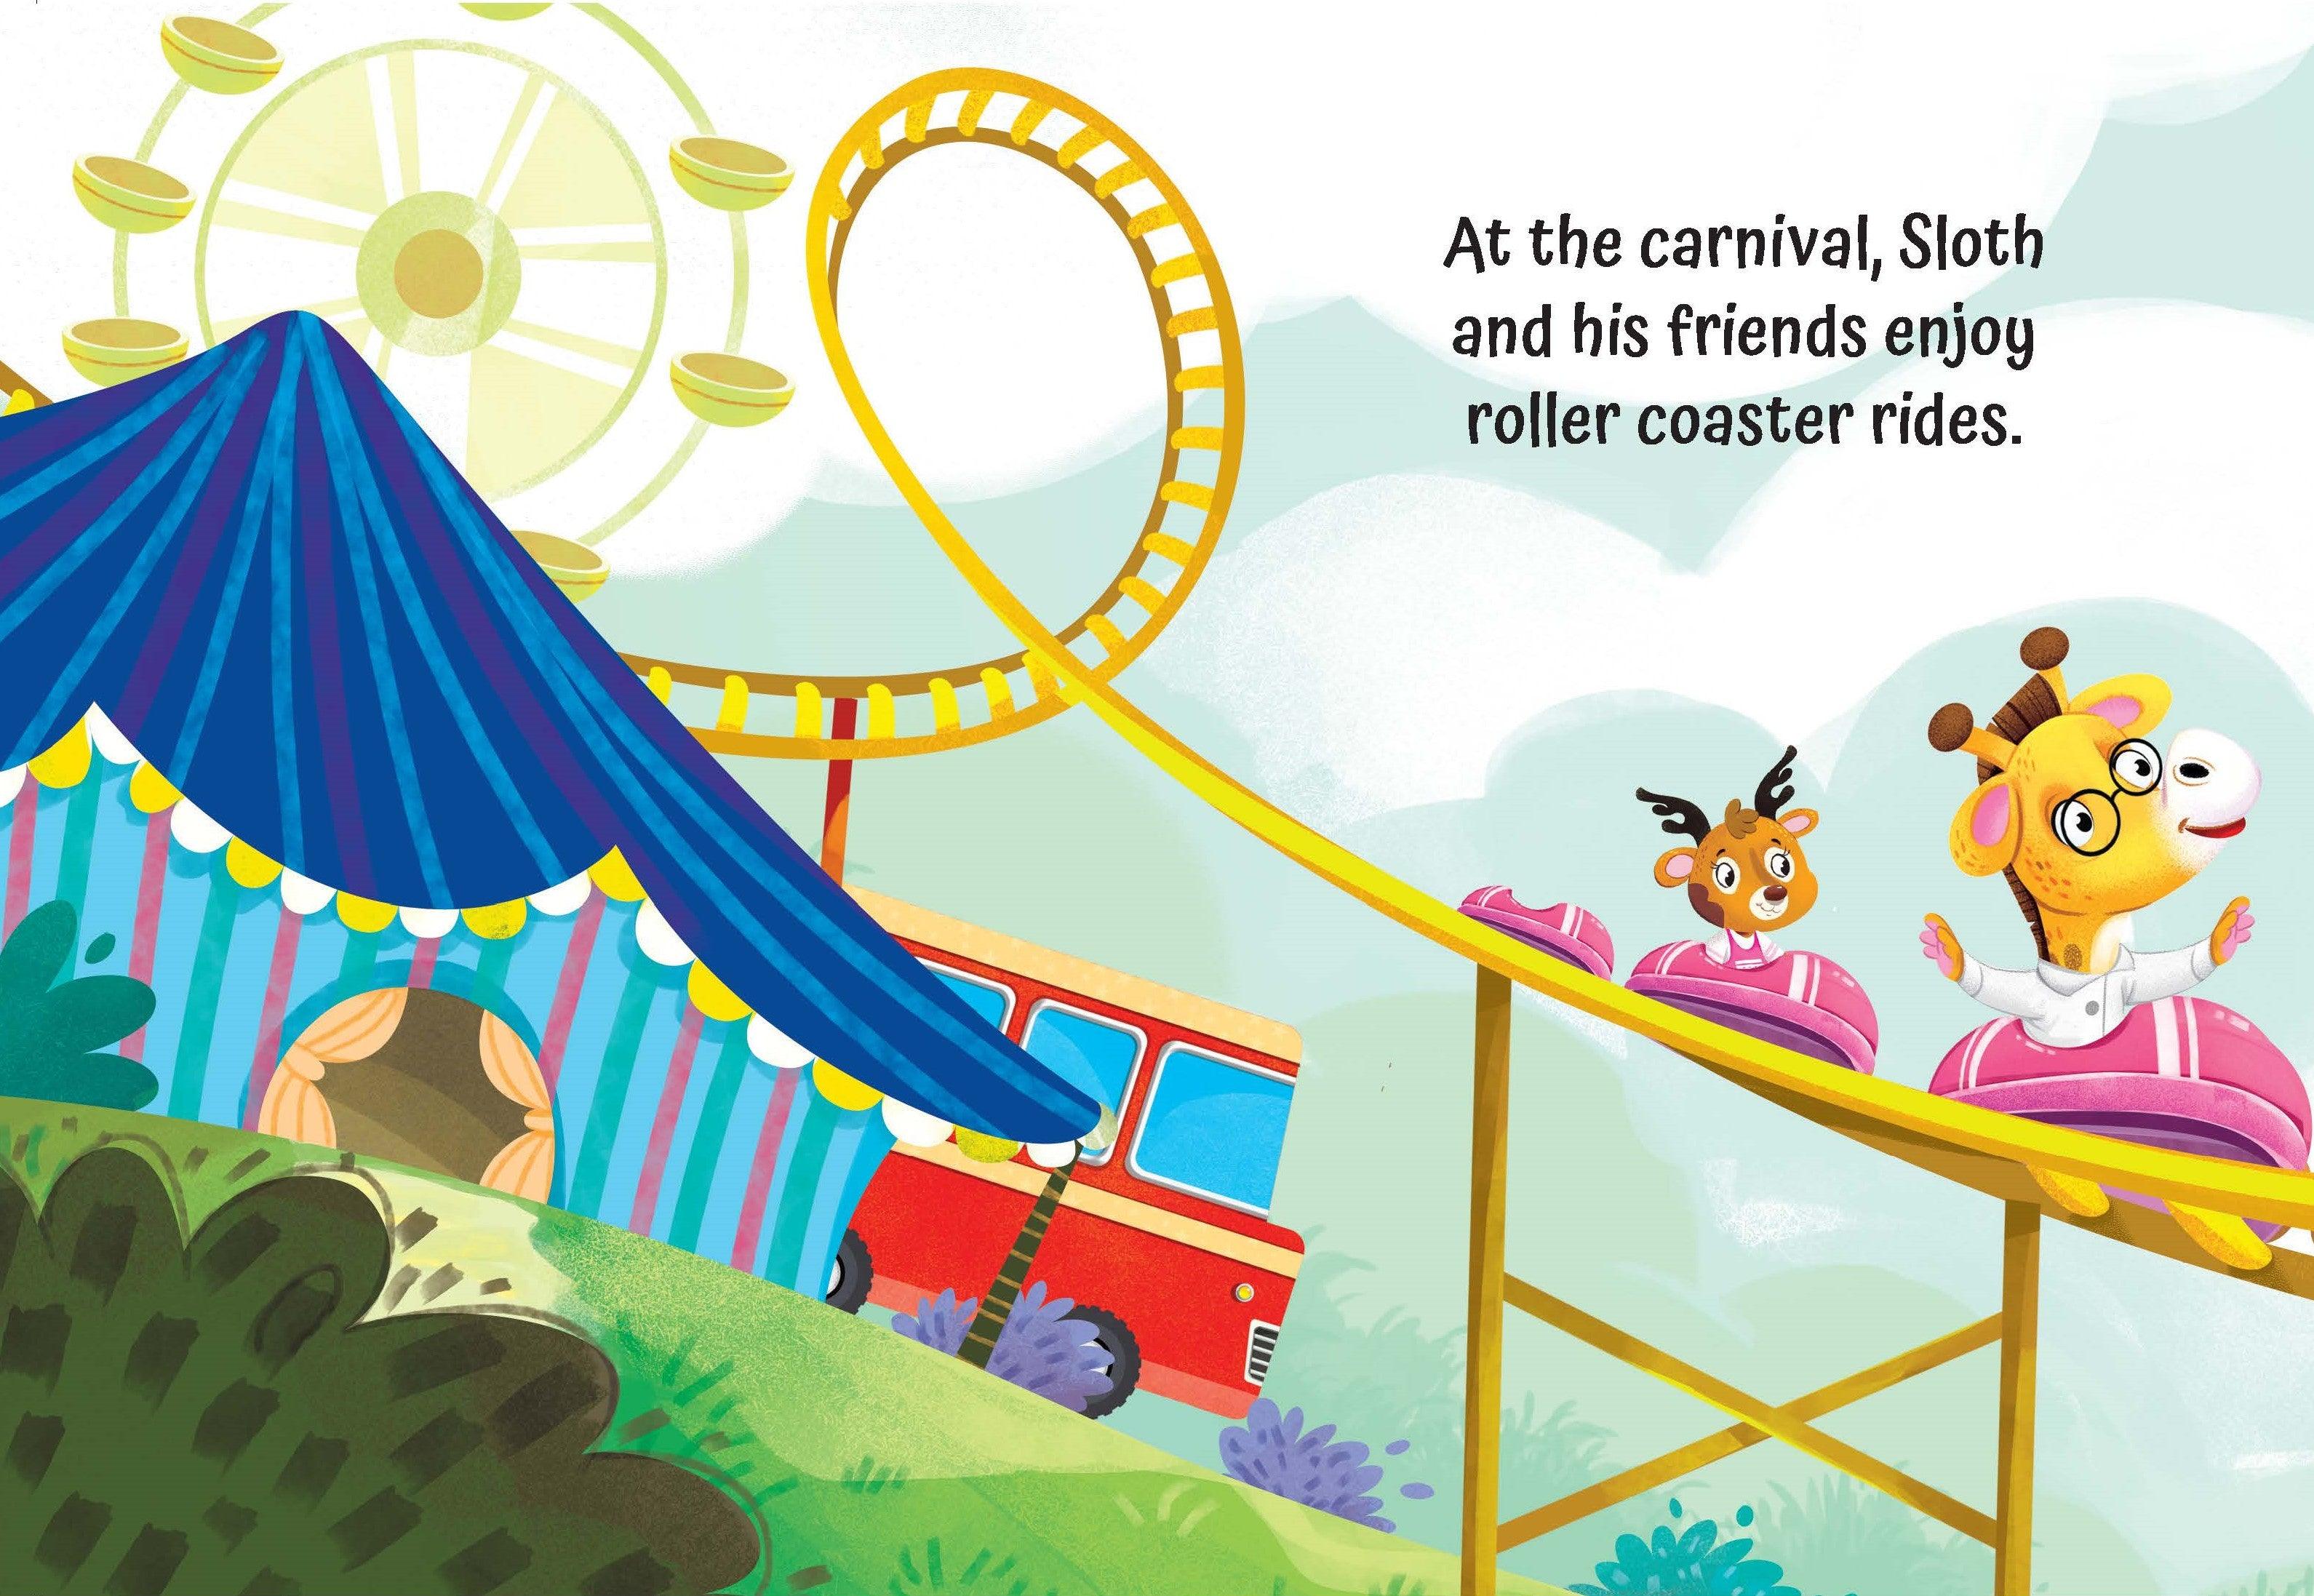 Dreamland A Birthday on the Bus - A Shaped Board book with Wheels - A Picture Book For Kids (English) - FunCorp India